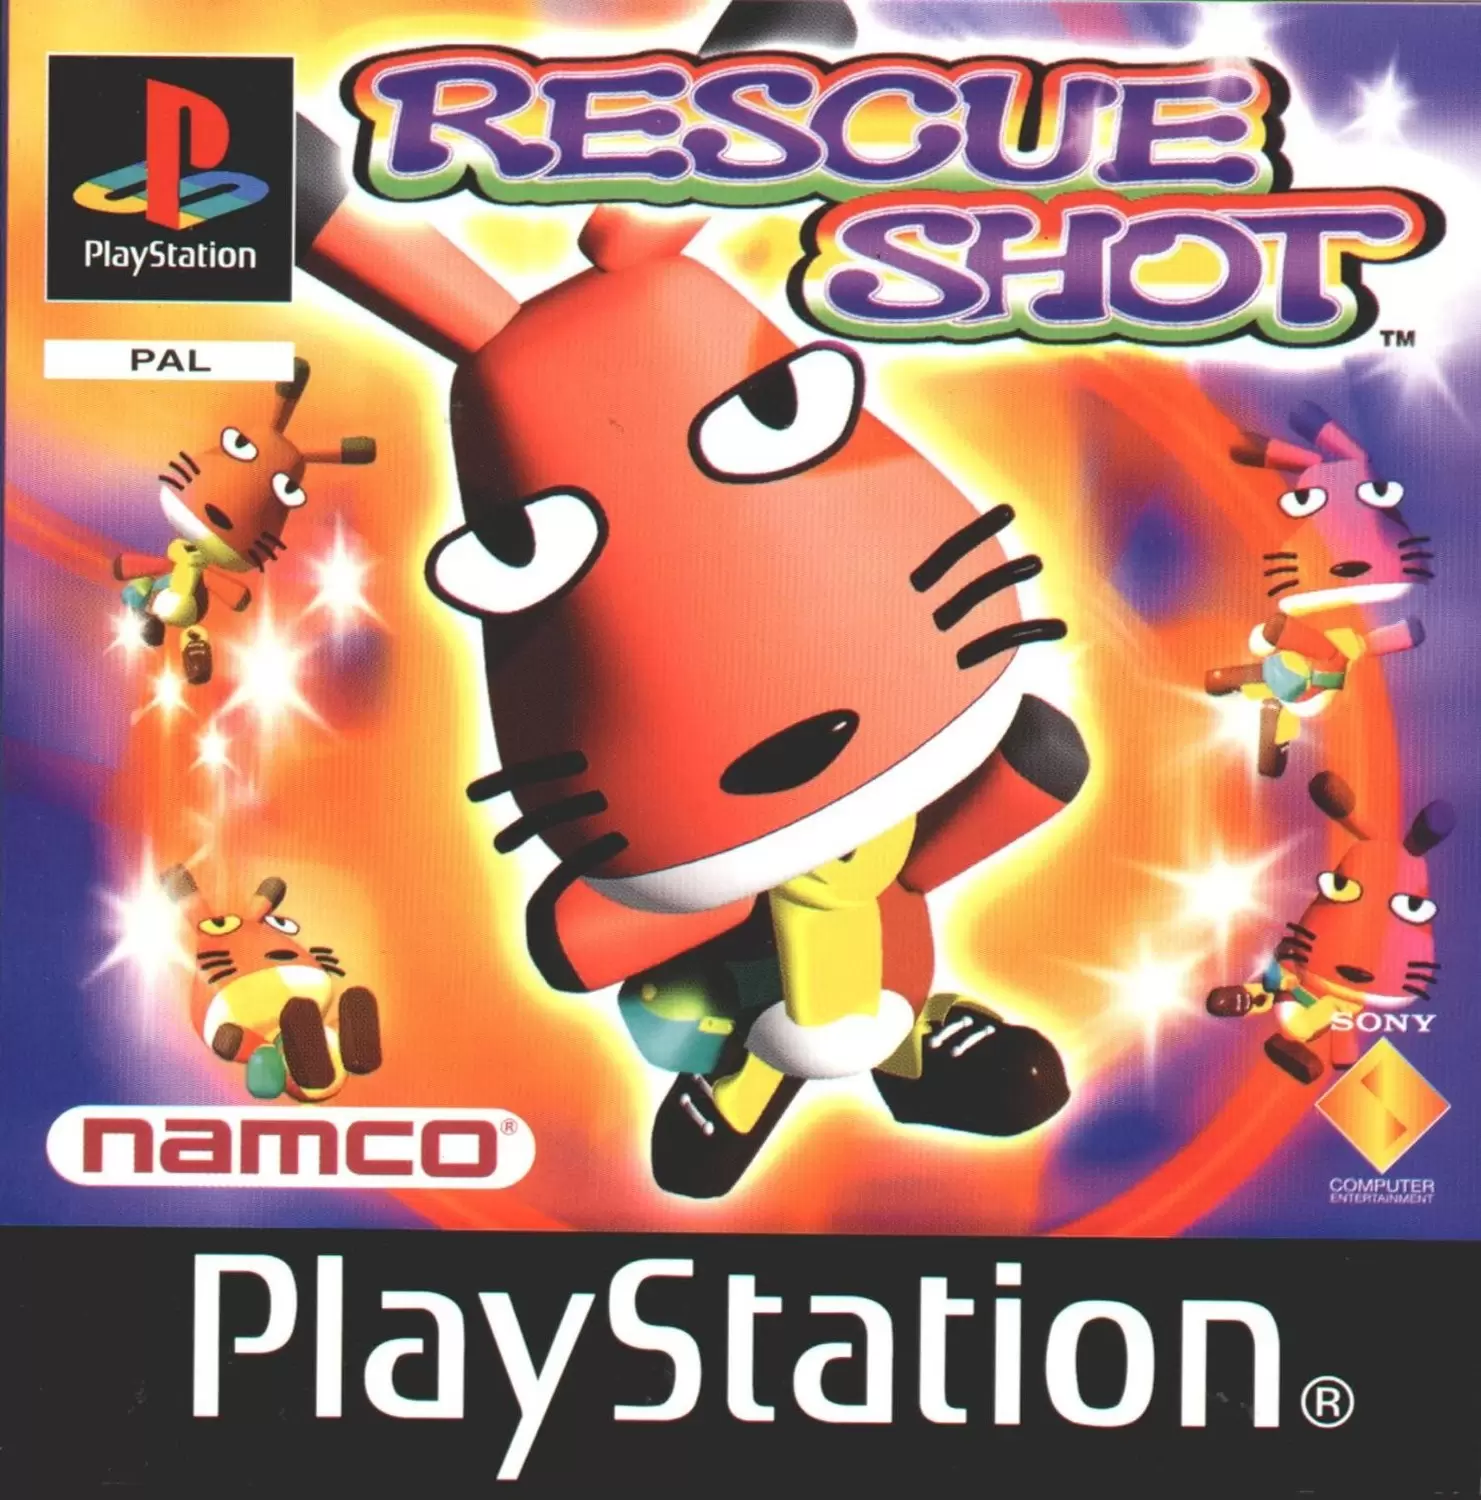 Playstation games - Rescue Shot